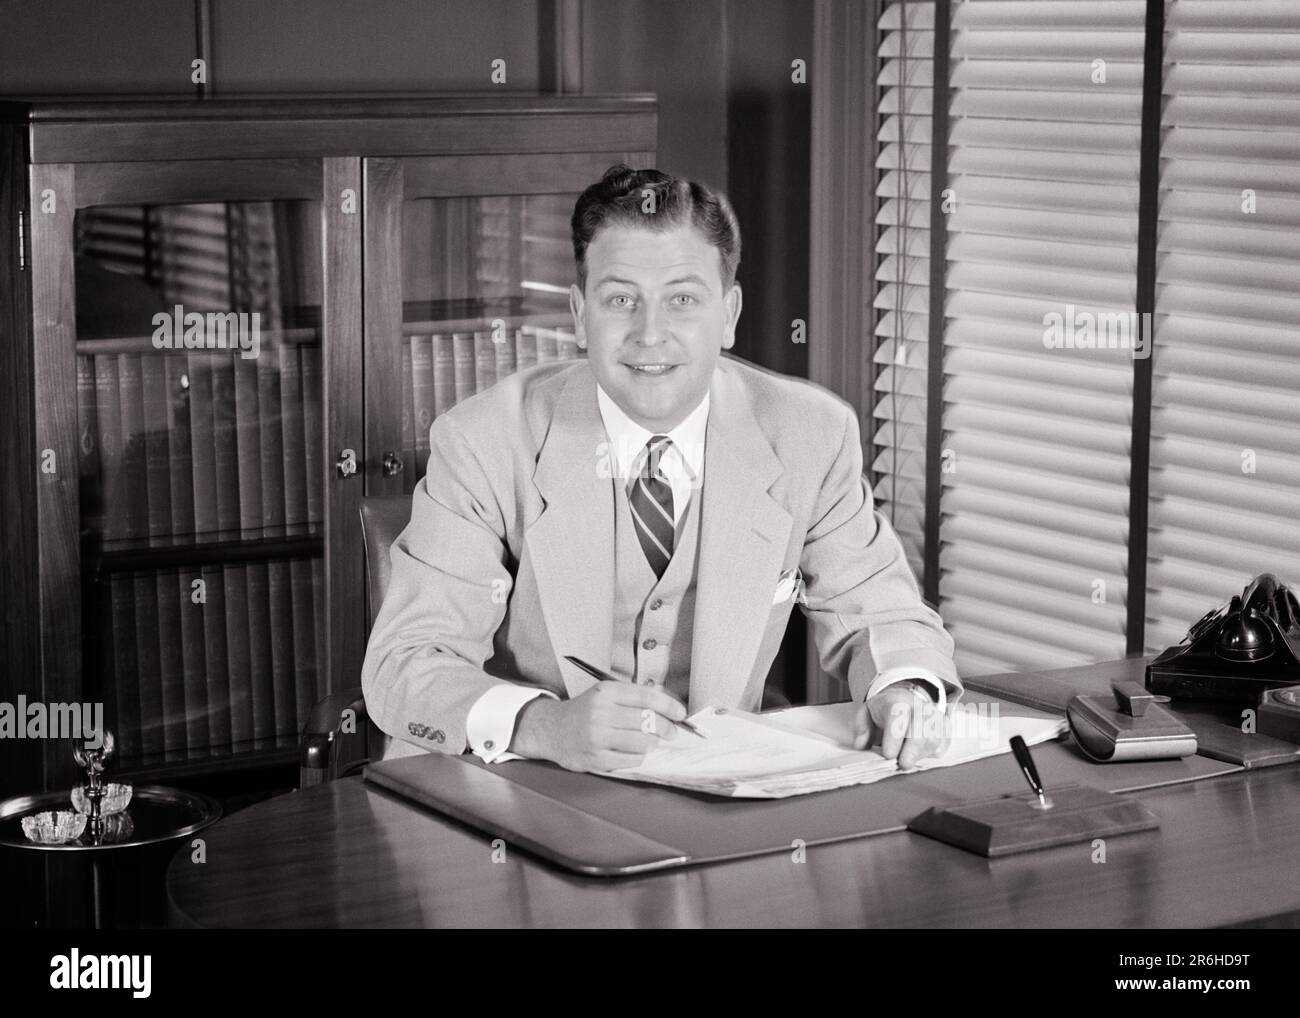 1950s SMILING BUSINESS MAN LOOKING AT CAMERA WEARING THREE PIECE SUIT SITTING AT DESK SIGNING PAPERS - o635 HAR001 HARS COMMUNICATION SIGNING INFORMATION PIECE PLEASED JOY LIFESTYLE SATISFACTION JOBS STUDIO SHOT MANAGER COPY SPACE HALF-LENGTH PERSONS MALES CONFIDENCE EXECUTIVES VEST B&W WIDE EYE CONTACT GOALS SKILL BUG-EYED SUIT AND TIE OCCUPATION HAPPINESS SKILLS CHEERFUL STRATEGY LEADERSHIP PRIDE OPPORTUNITY OCCUPATIONS SMILES BOSSES THREE PIECE SUIT JOYFUL STYLISH BLOTTER WIDE-EYED ATTORNEY MANAGERS MID-ADULT MID-ADULT MAN STARTLED VENETIAN BLINDS BLACK AND WHITE CAUCASIAN ETHNICITY Stock Photo